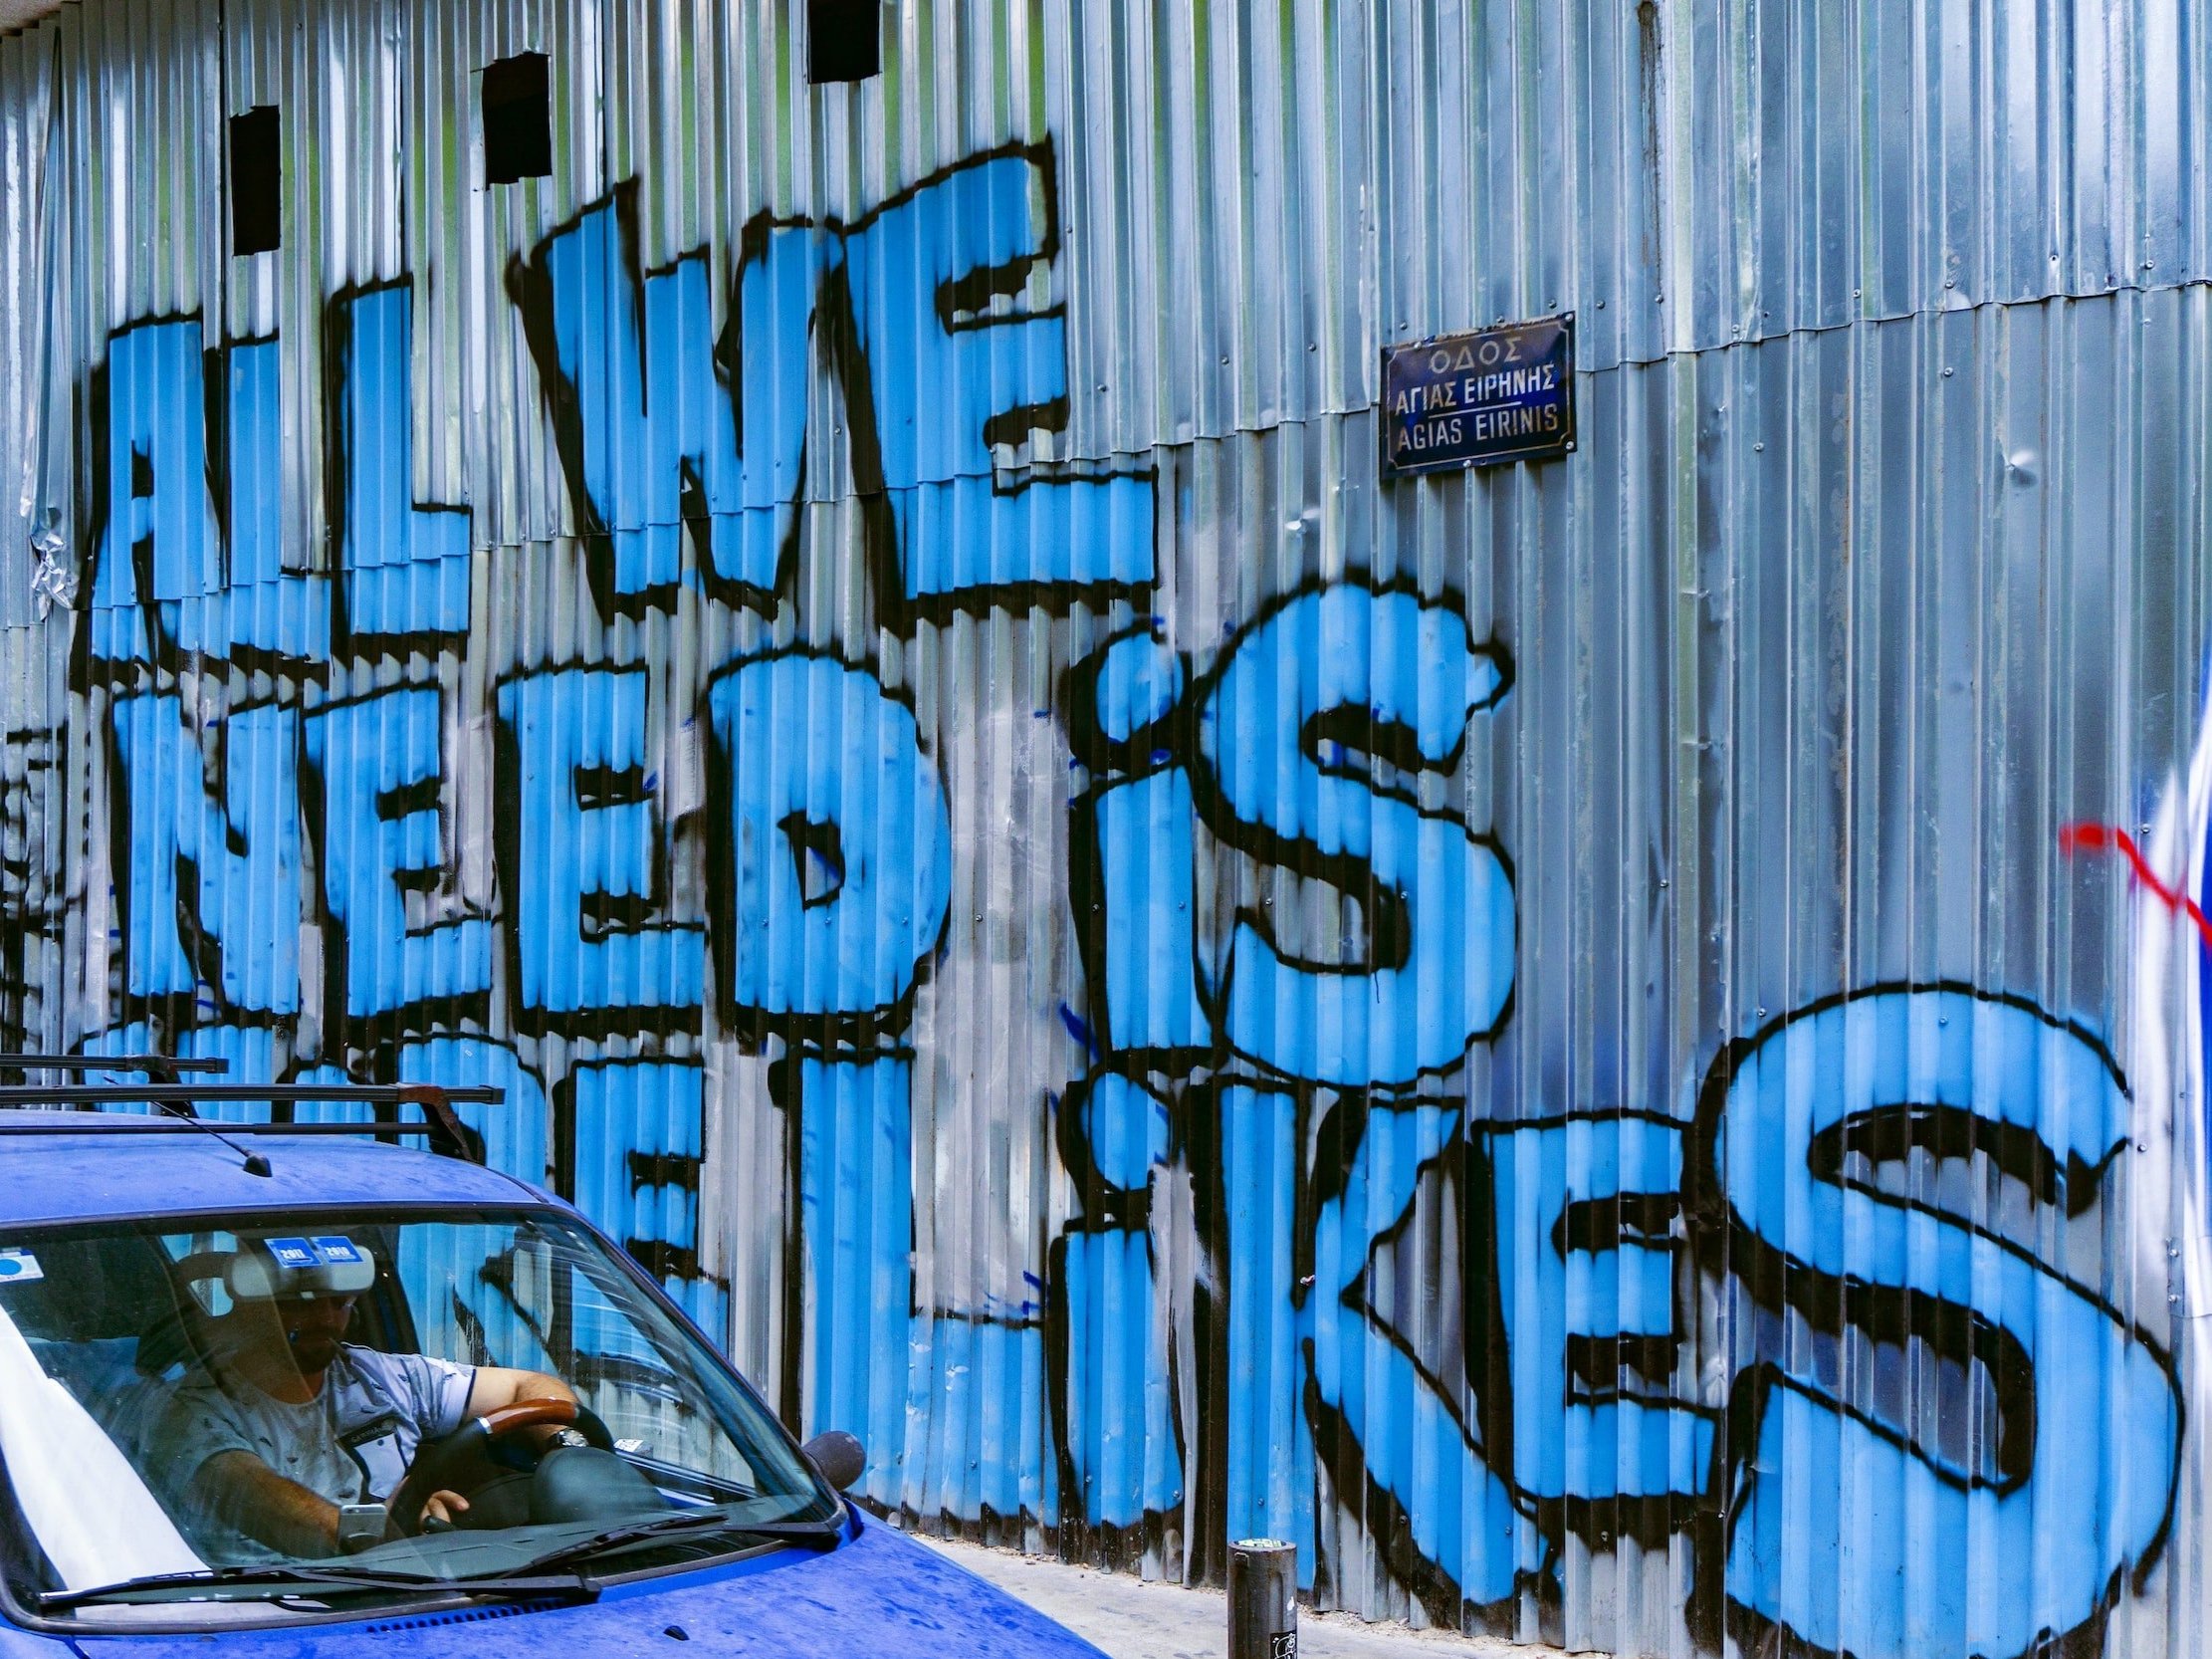 Graffiti with the words "All We Need Is More Likes" sprayed on a corrugated iron wall.